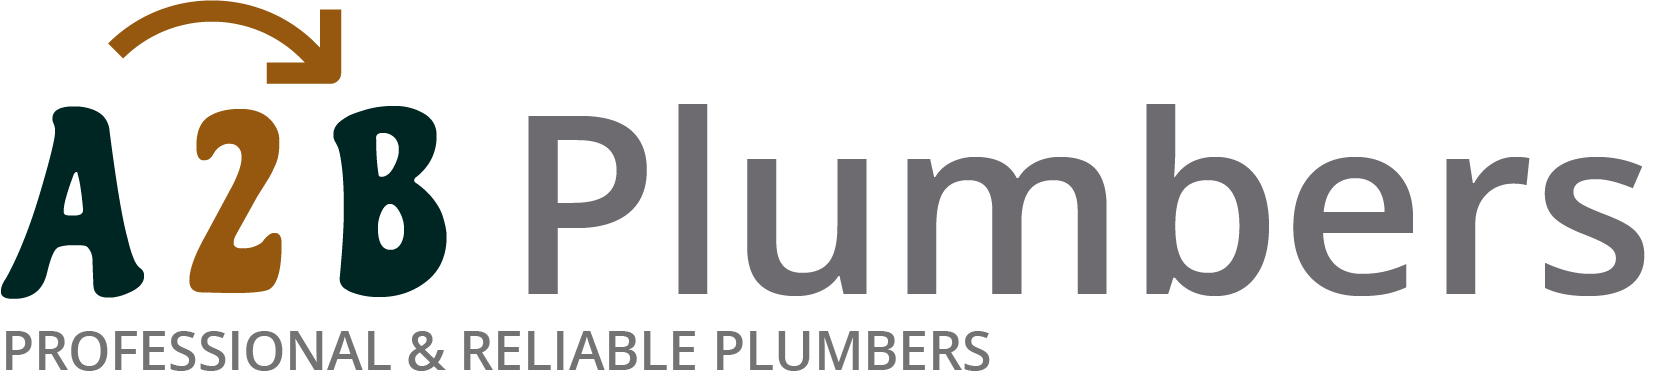 If you need a boiler installed, a radiator repaired or a leaking tap fixed, call us now - we provide services for properties in Dundee and the local area.